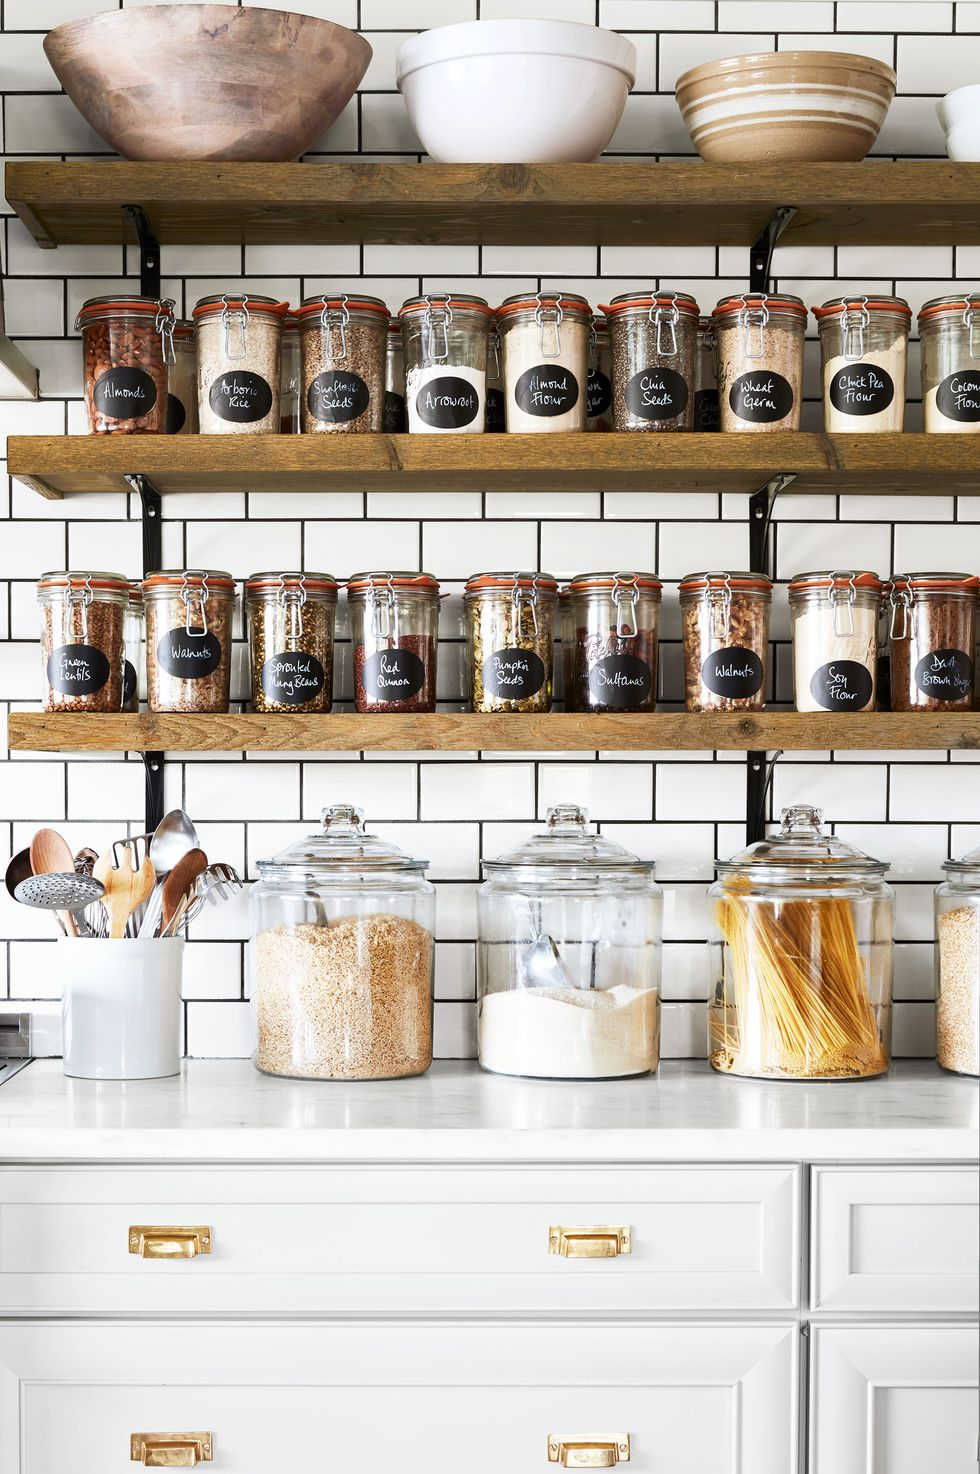 5 Tips For An Organized Pantry...Even if Yours is Tiny